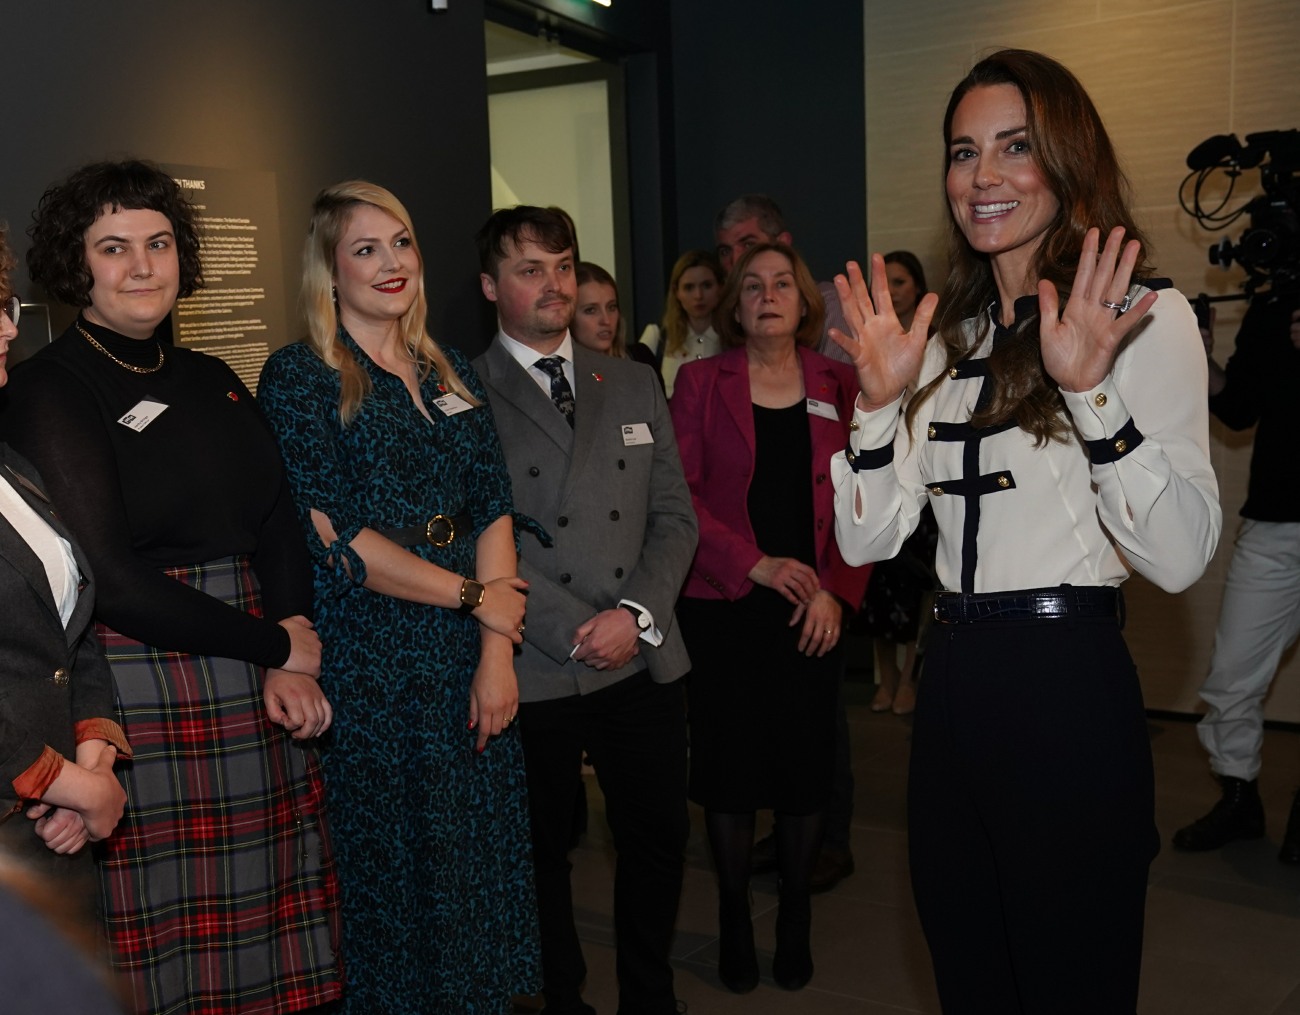 The Duchess of Cambridge visited the Imperial War Museum (IWM) London.and   officially opened two new galleries, The Second World War Galleries and The Holocaust Galleries. She  also viewed the exhibition Generations: Portraits of Holocaust Survivors